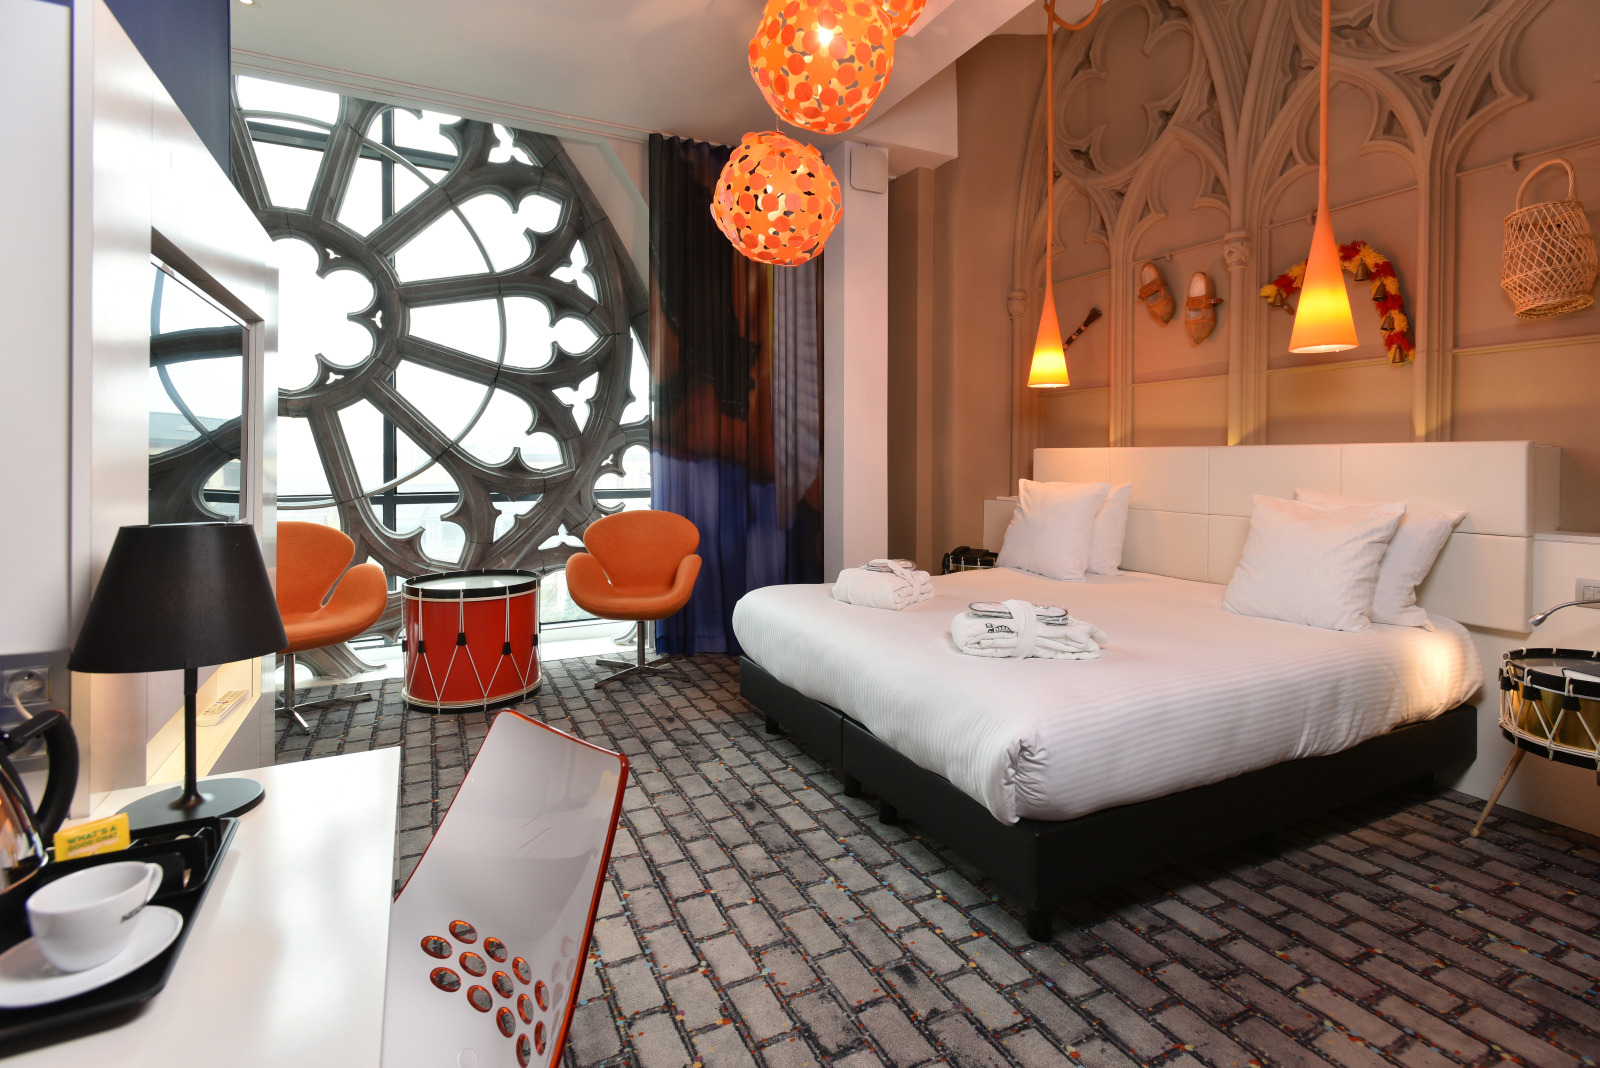 Great bedroom at Martin’s Dream Hotel in Mons, province of Hainaut